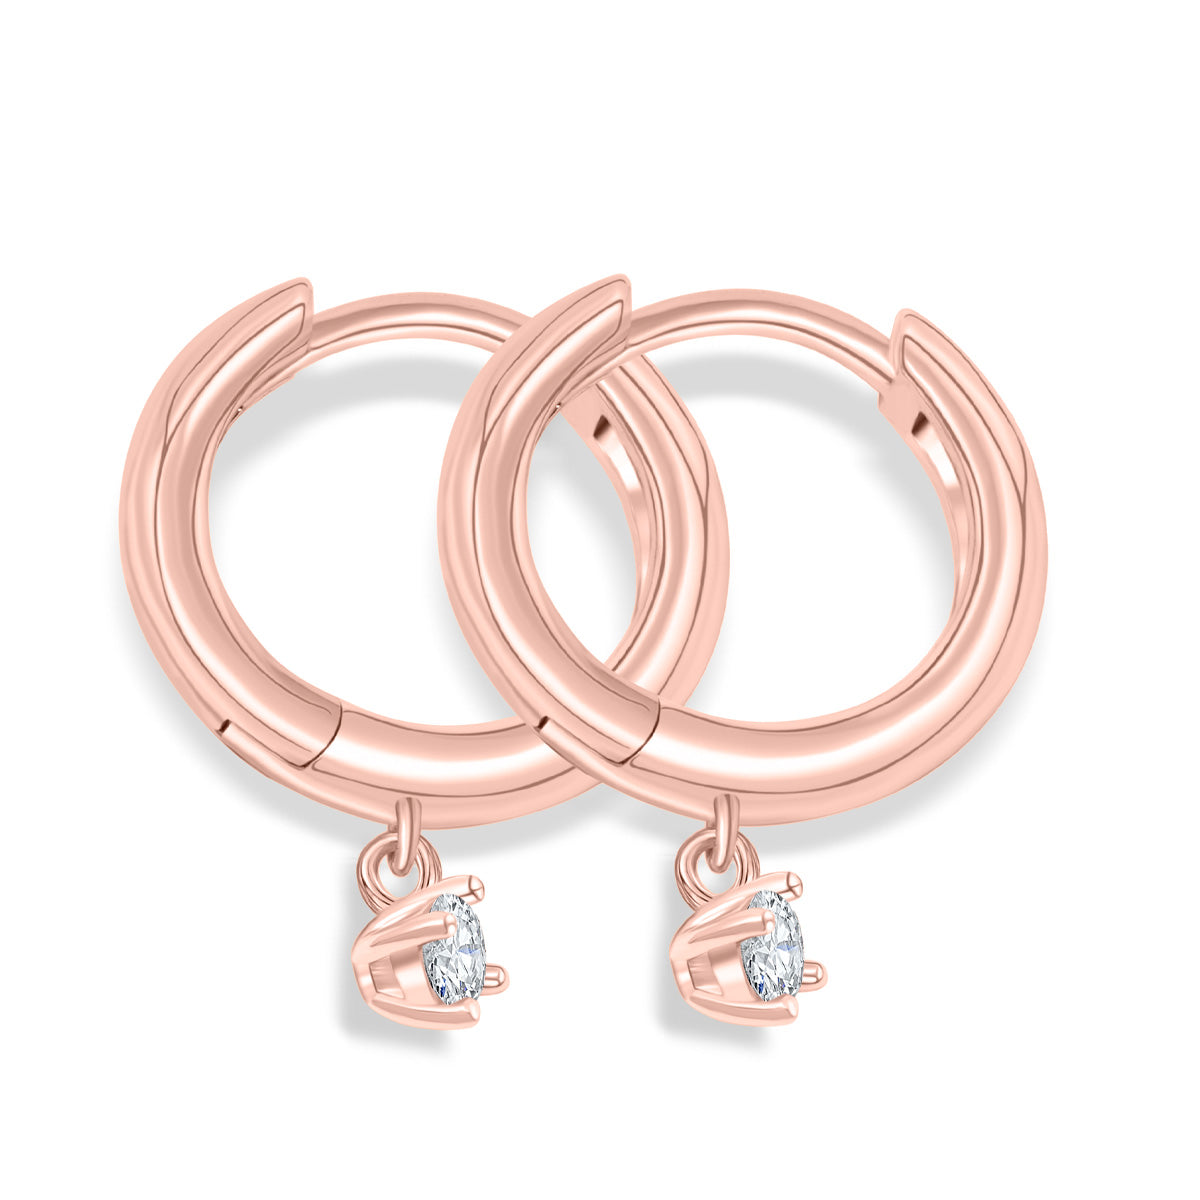 Rose gold plated hoop earrings with stone